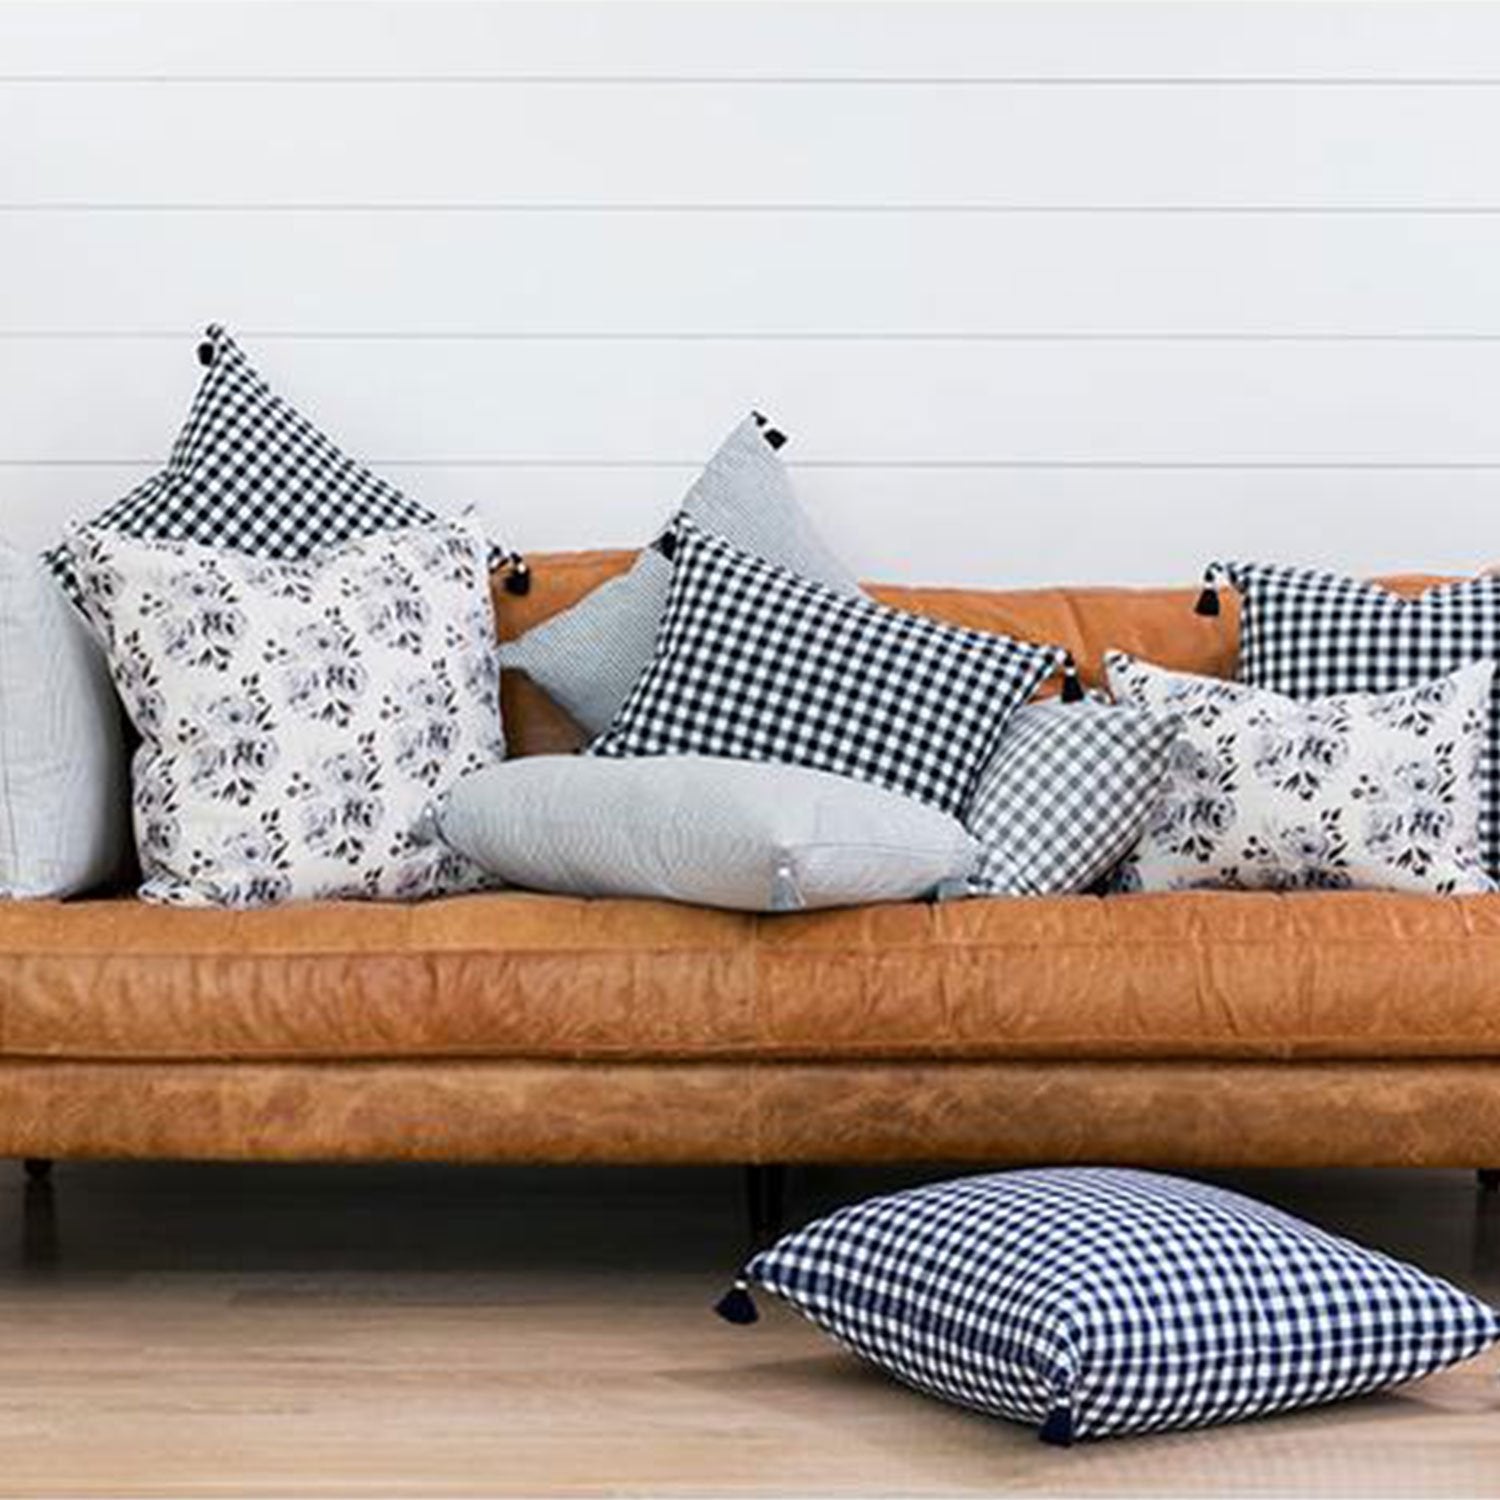 Grey Gingham Pillow with Tassels on Sofa